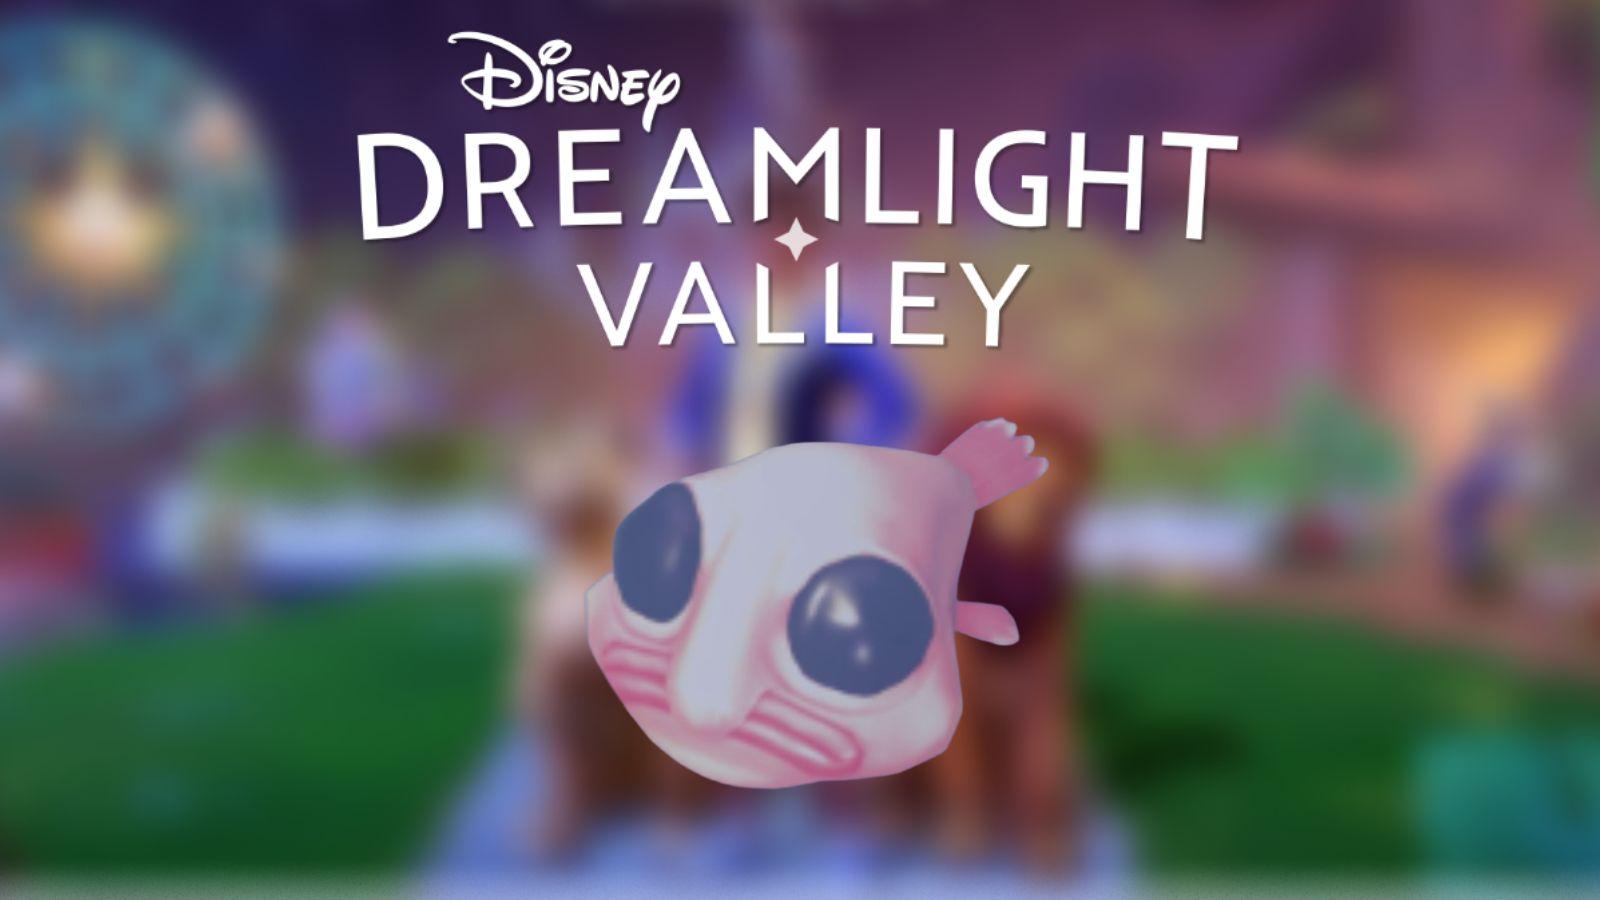 Disney Dreamlight Valley Here and There fish